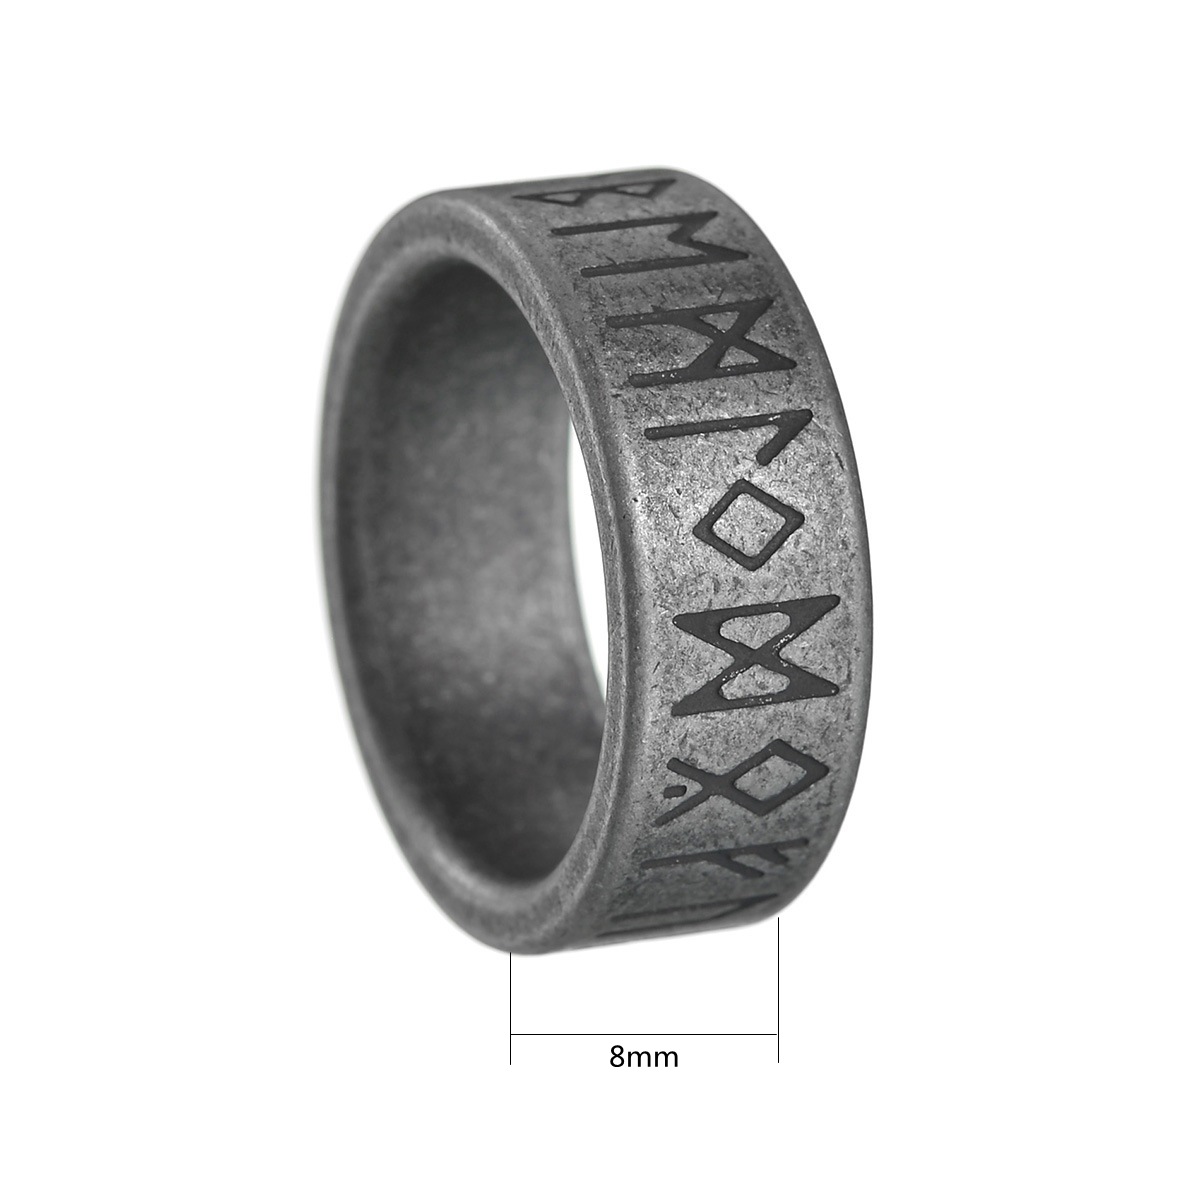 8mm ancient silver rune 7